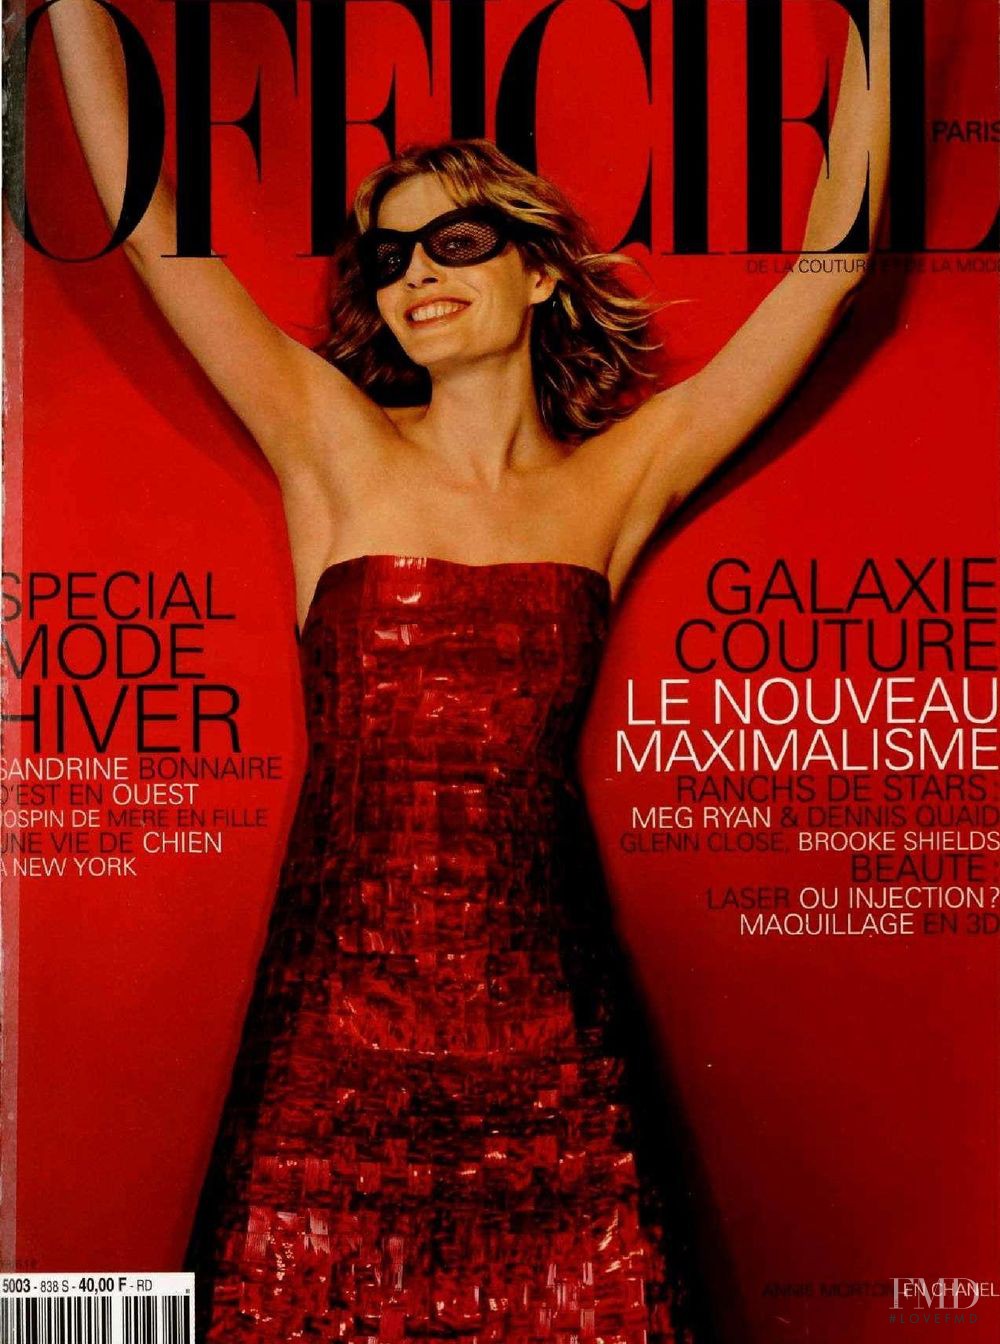 Cover of L'Officiel France with Annie Morton, September 1999 (ID:1978 ...